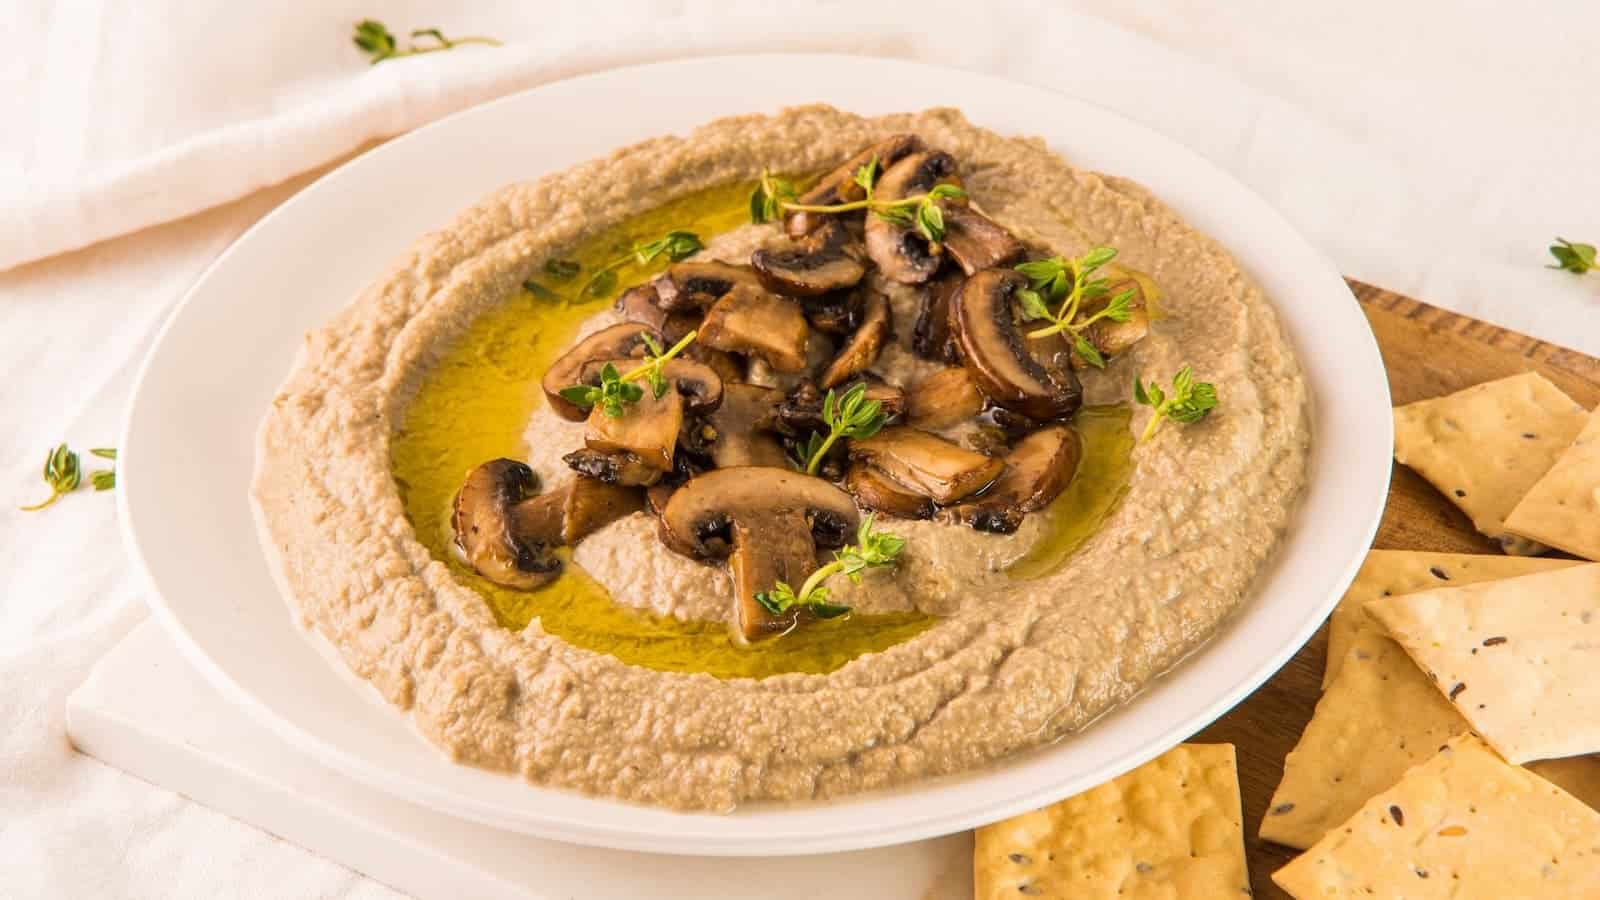 Hummus with mushrooms and crackers on a white plate.